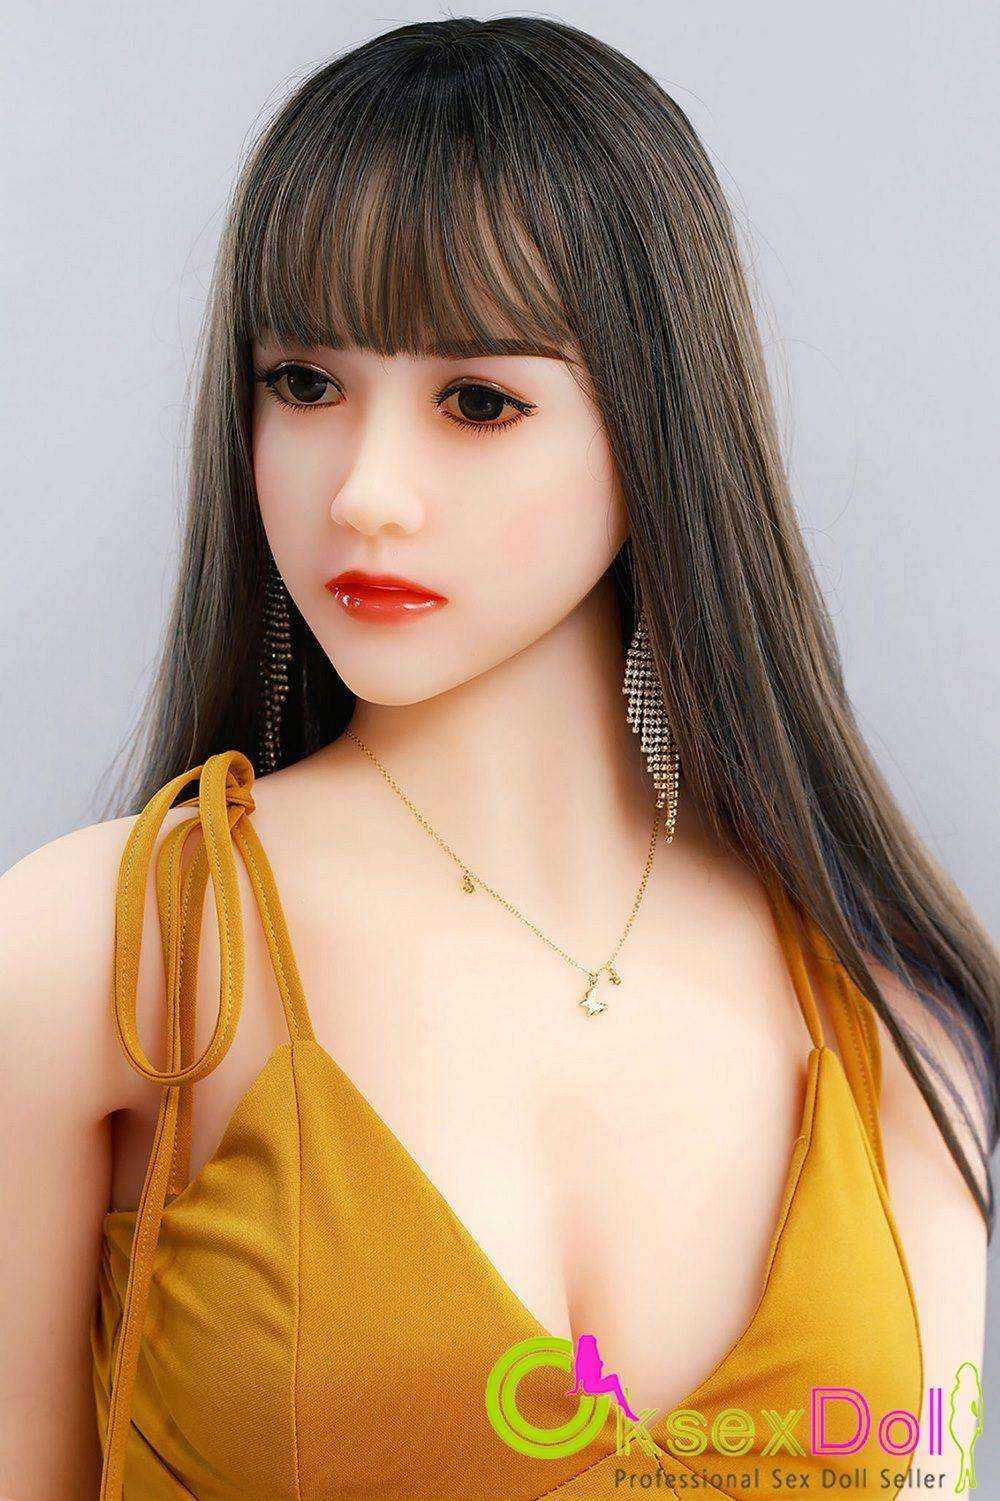 OkSexDoll Real Sex Dolls Pictures